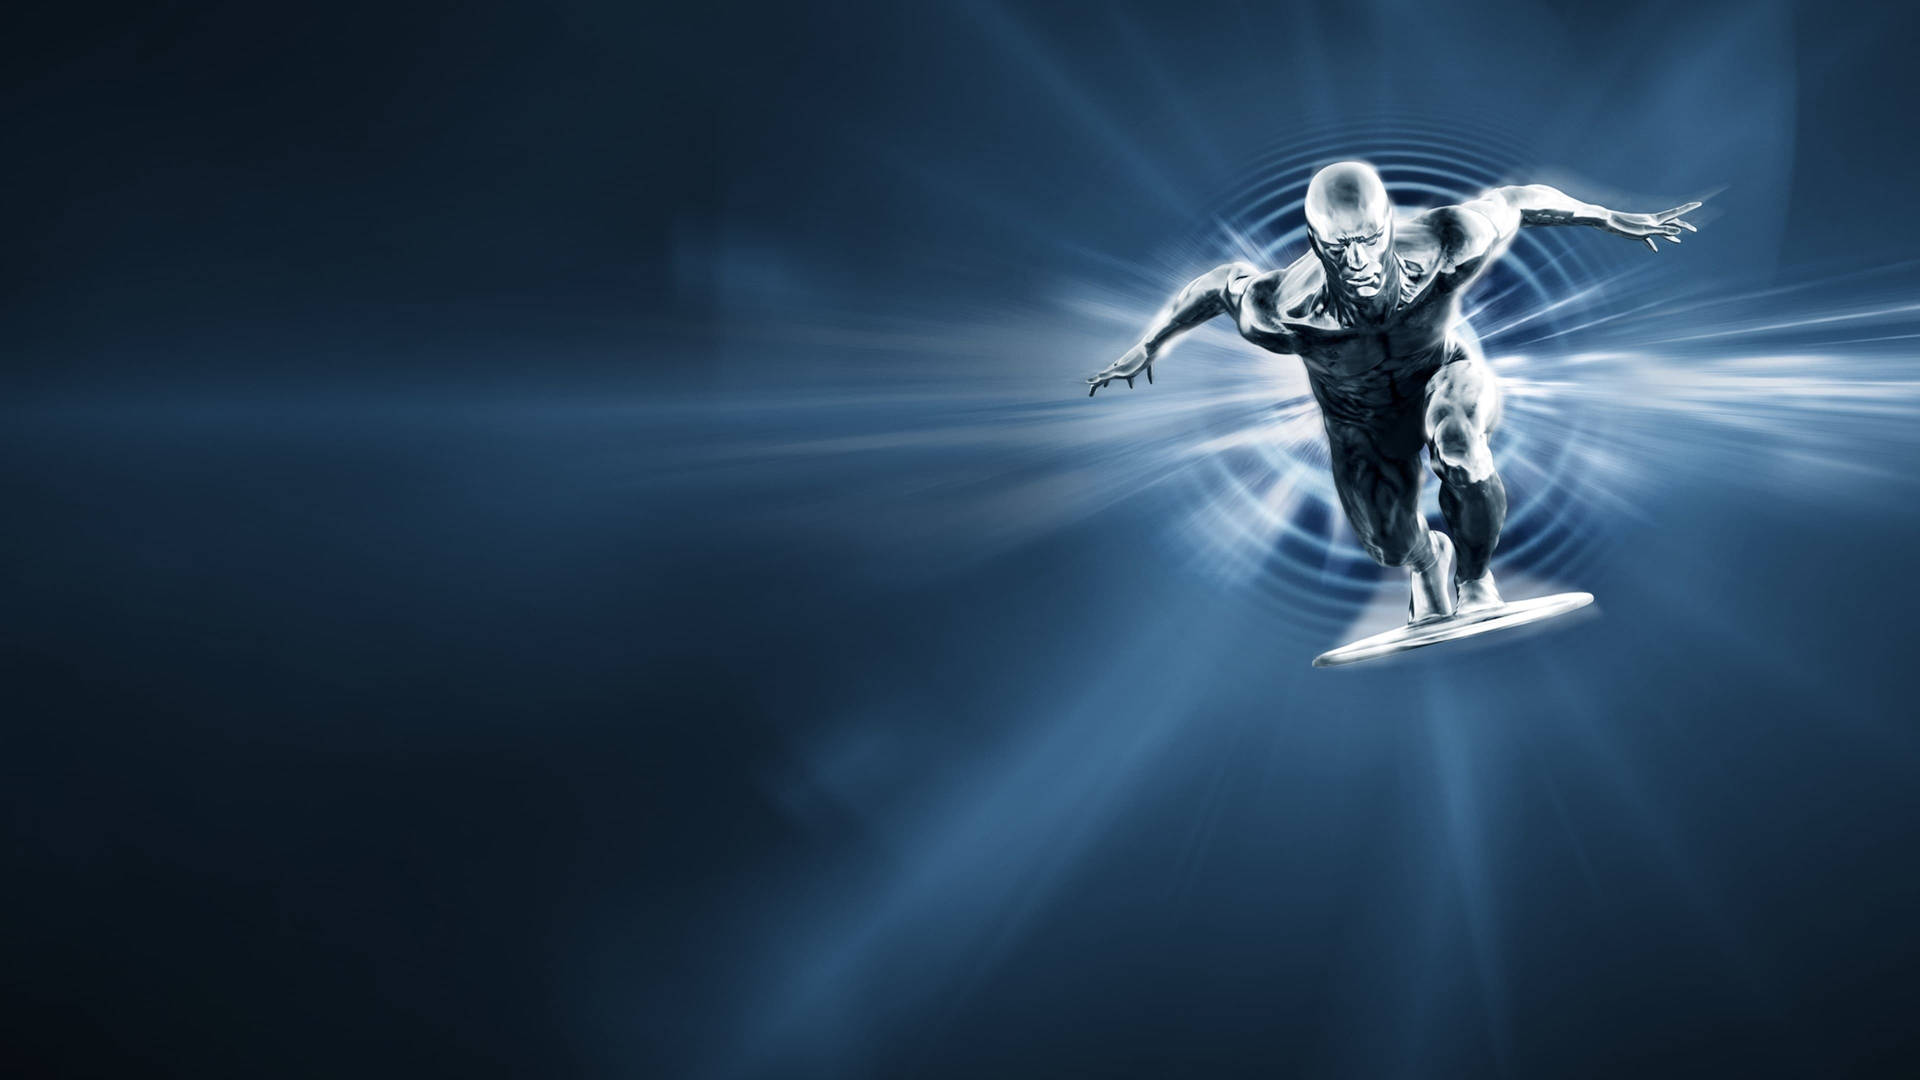 The Fantastic Four With Silver Surfer In Epic Battle Pose Background